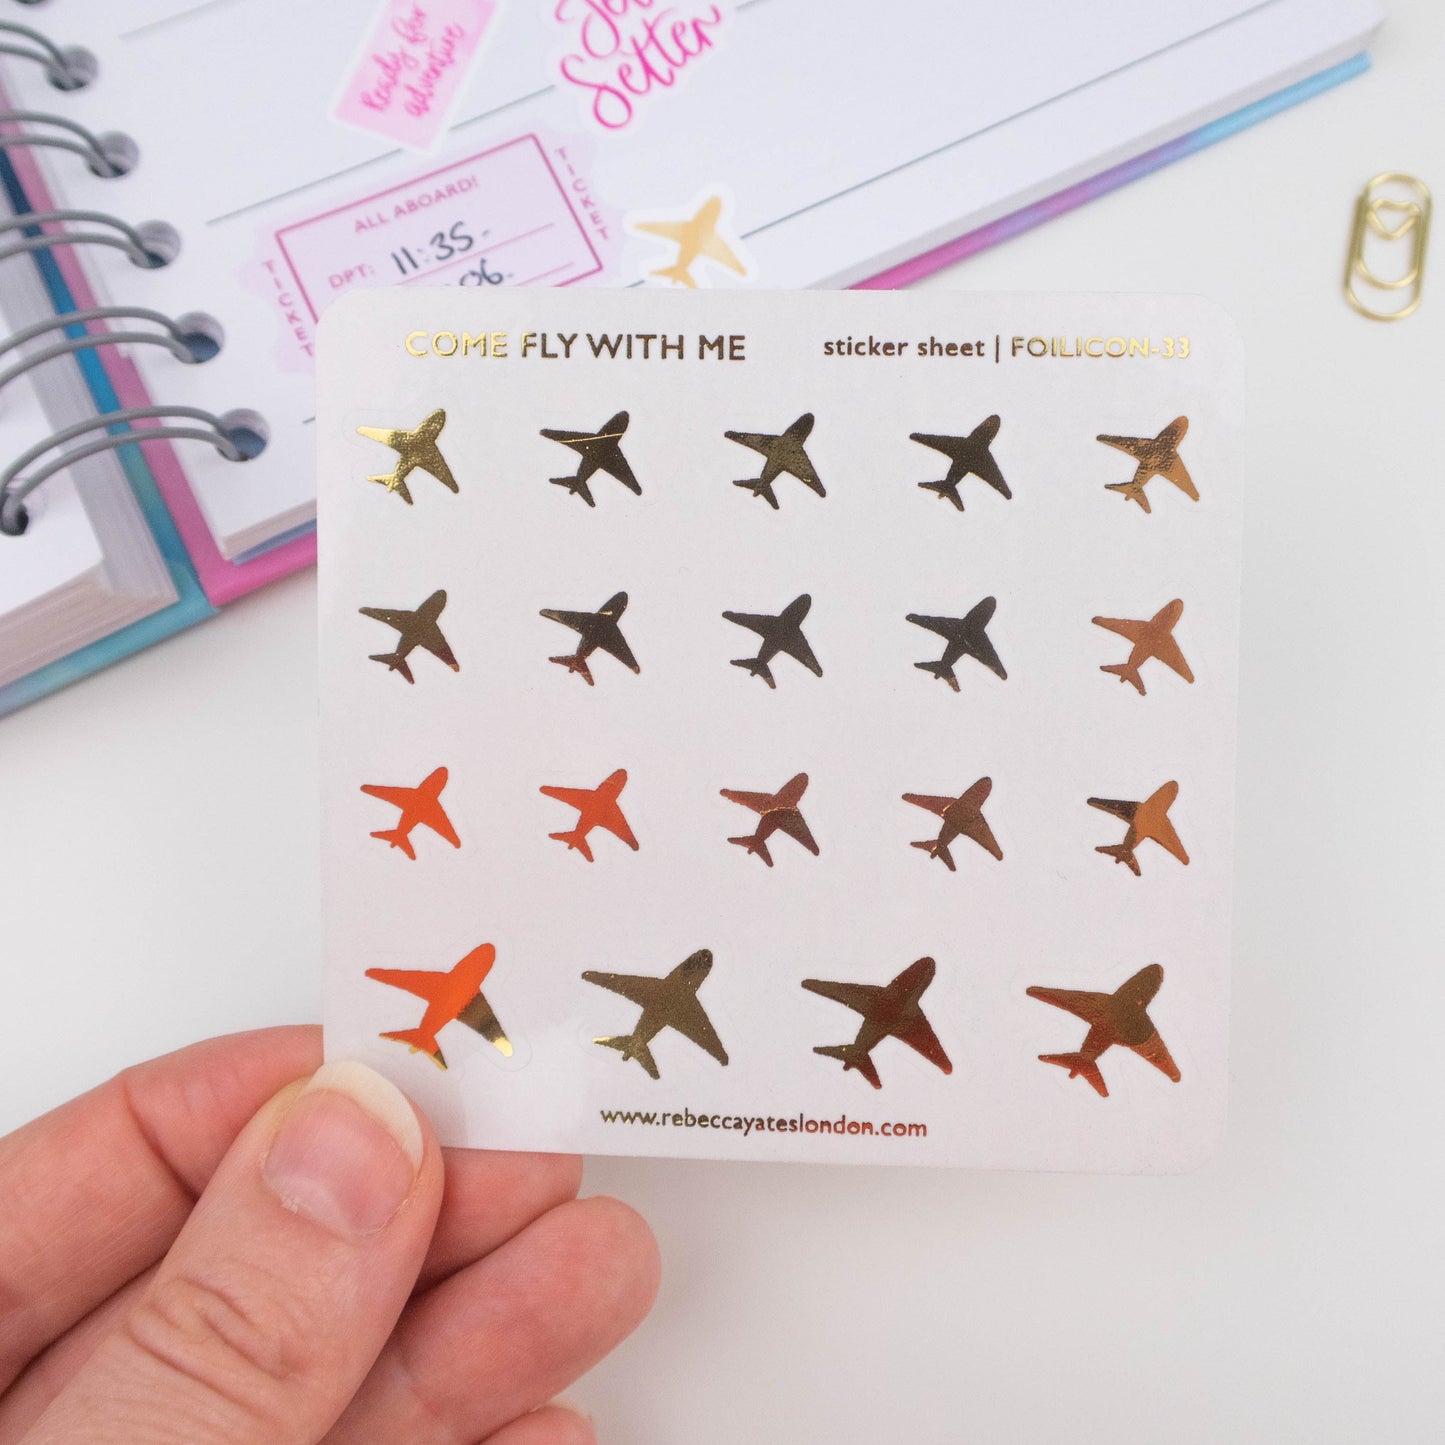 COME FLY WITH ME - FOILED PLANNER STICKERS